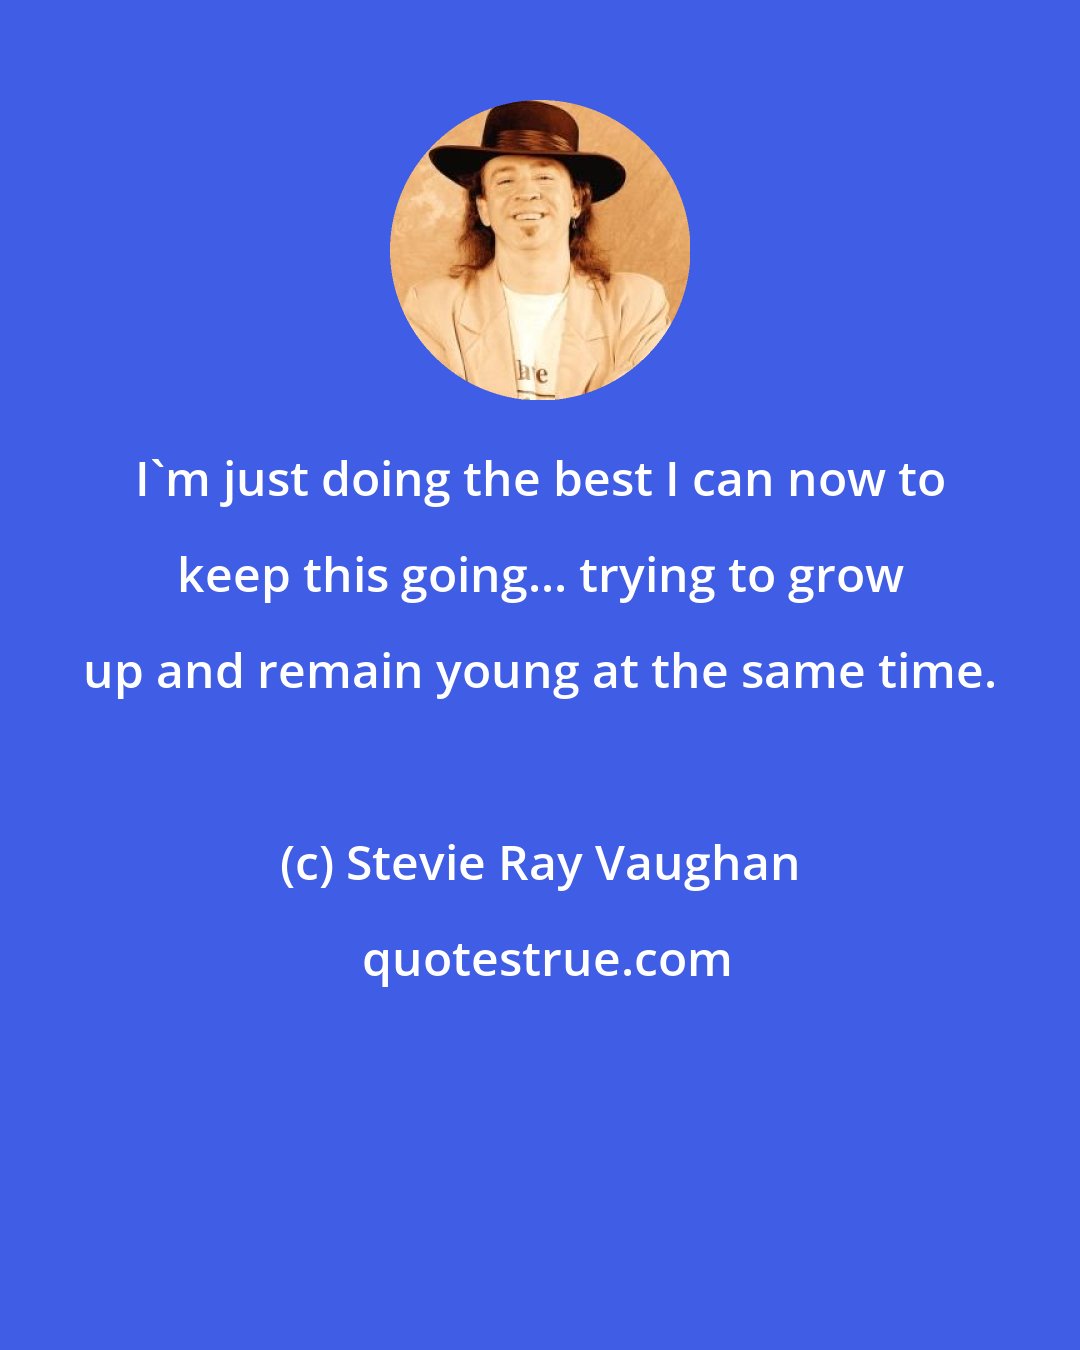 Stevie Ray Vaughan: I'm just doing the best I can now to keep this going... trying to grow up and remain young at the same time.